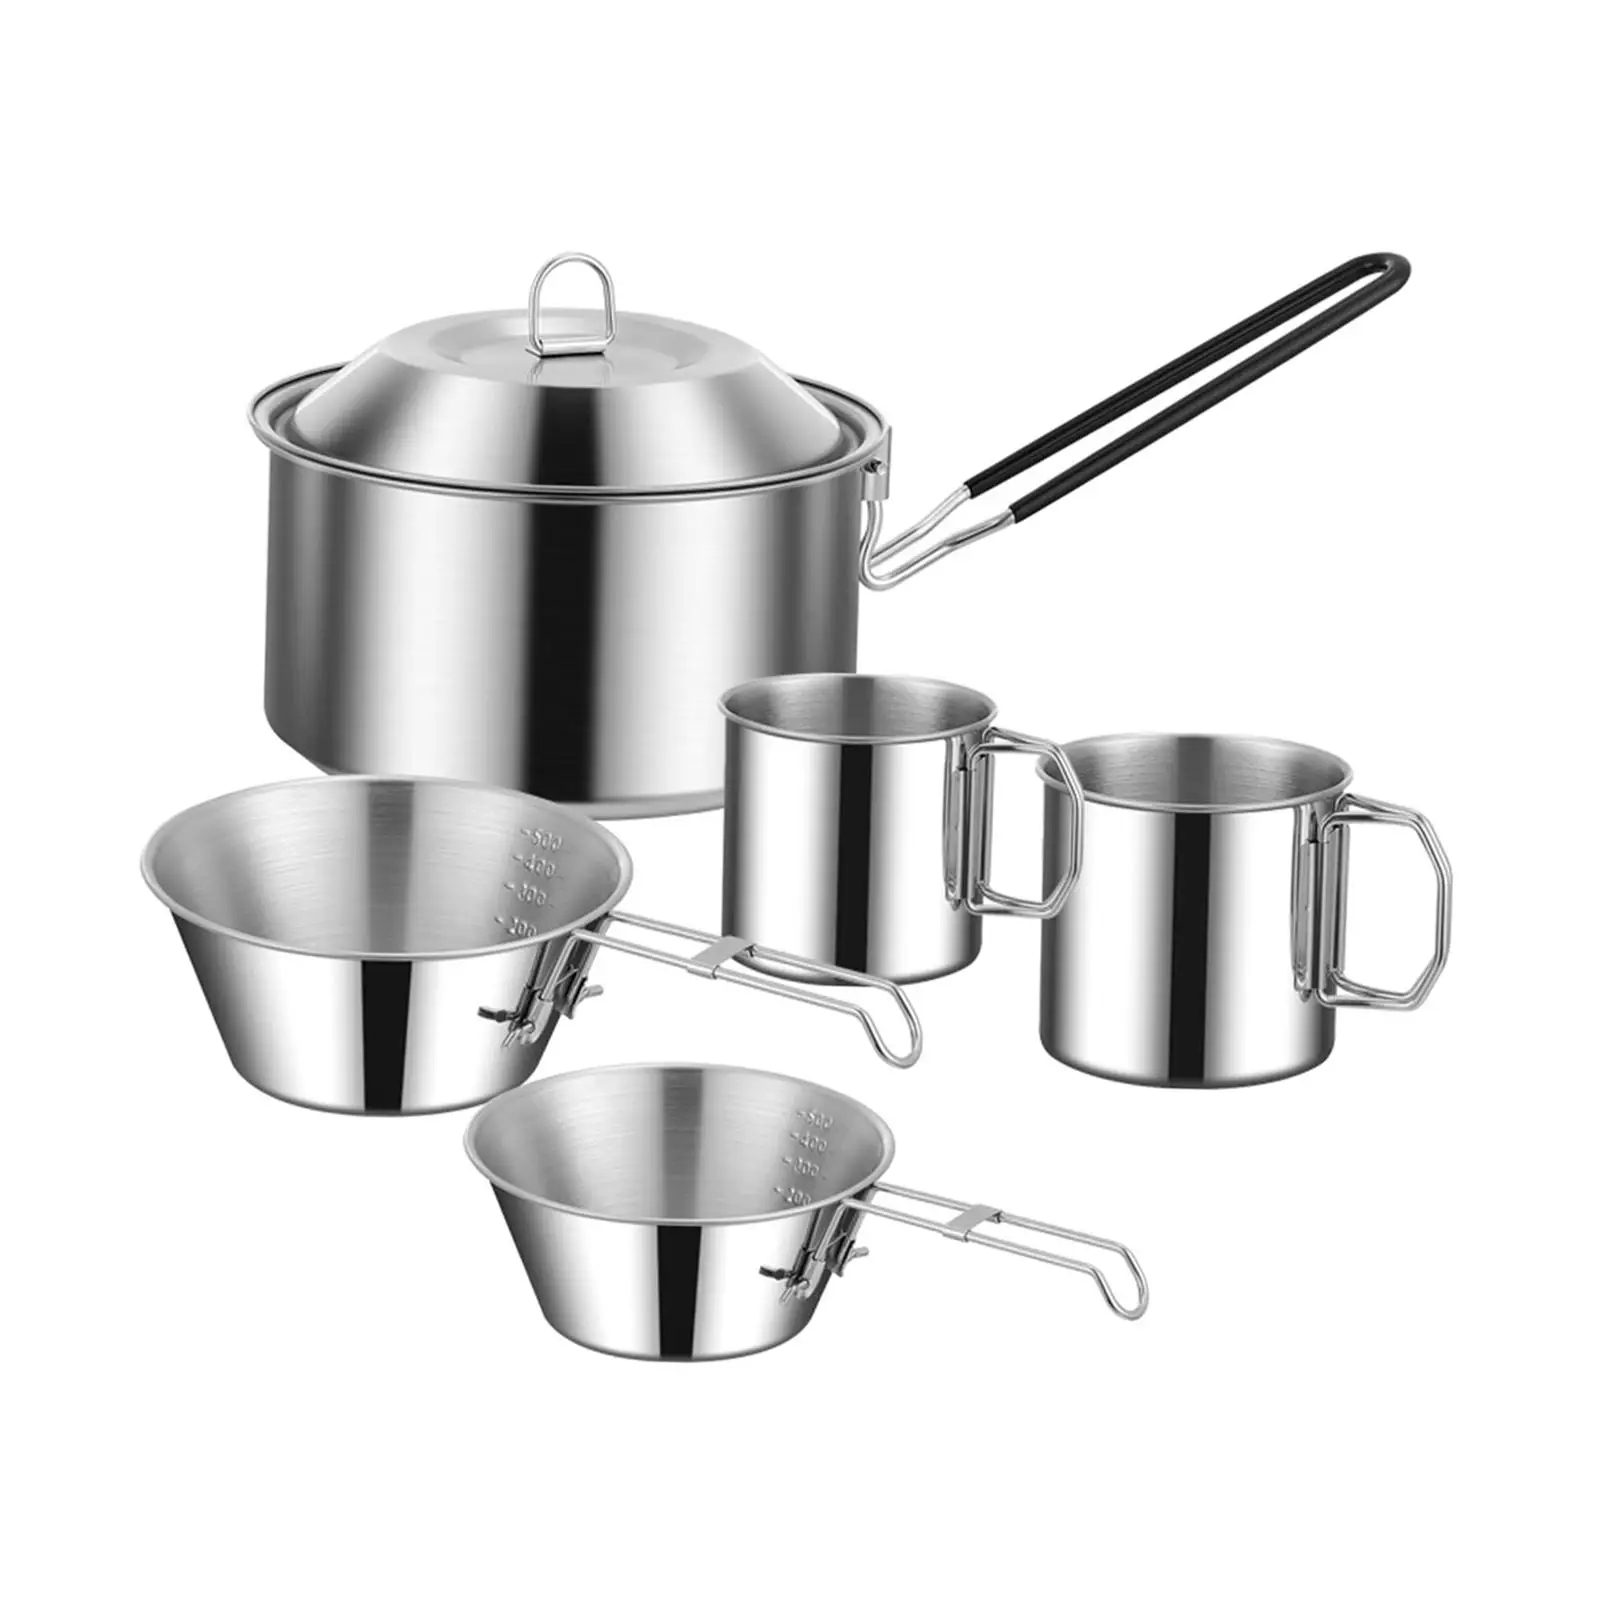 Cooking Pot set Camping Portable Household Tableware Accessories for Picnic